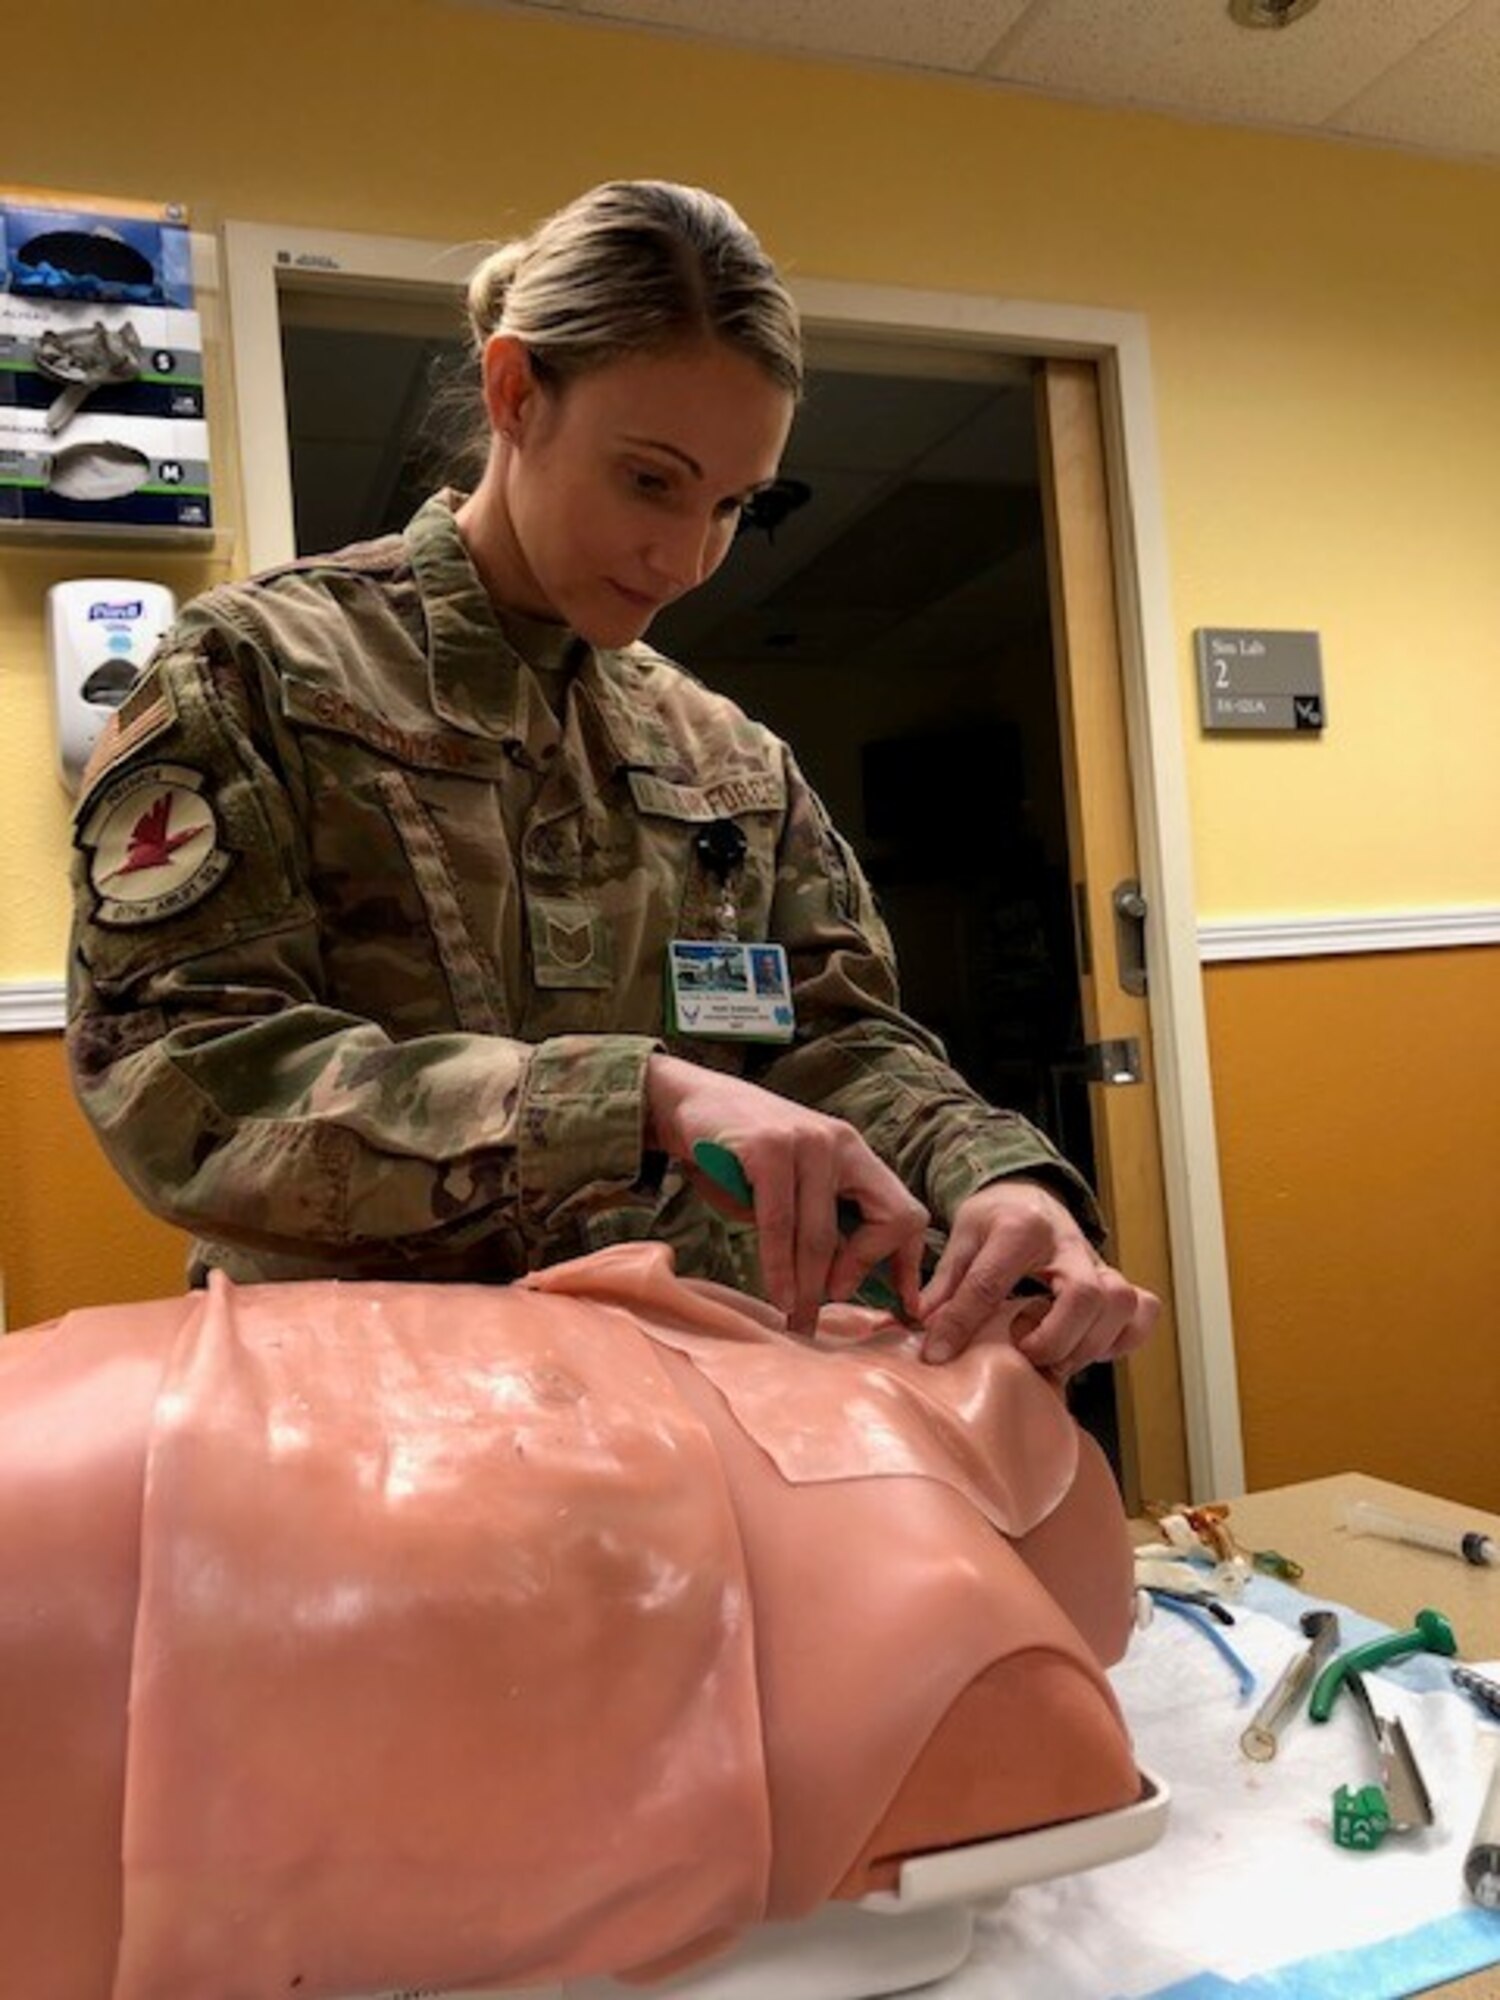 Air Force Tech. Sgt. Heidi Goldman, 90th Fighter Squadron independent duty medical technician, performs a simulated cricothyroidoctomy as part of her annual sustainment and emergency medicine procedure skills, Oct. 31, 2020 at Joint Base Elmendorf-Richardson, Alaska. IDMTs are required at minimal to perform and demonstrate emergency airway skills once a year.